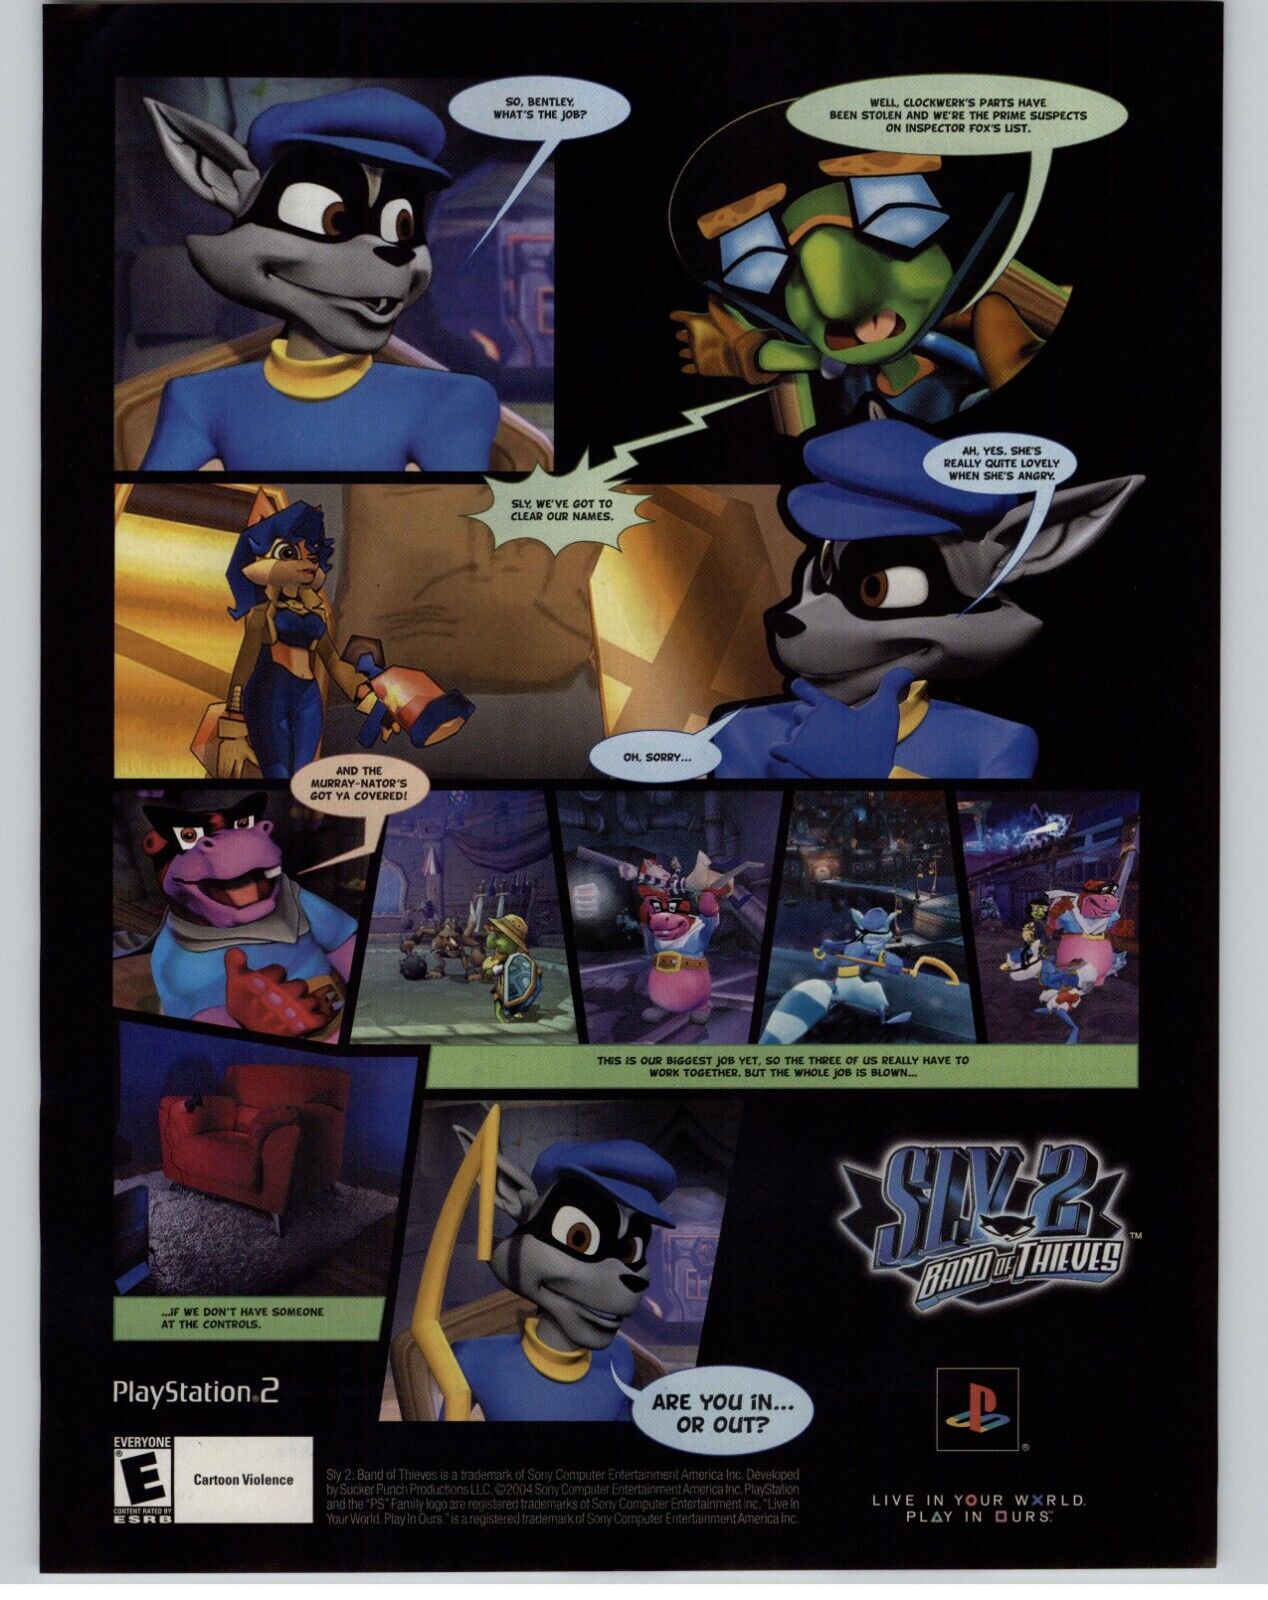 2004 Sly 2 Band Of Thieves PlayStation PS2 Video Game Art Vintage Print Ad